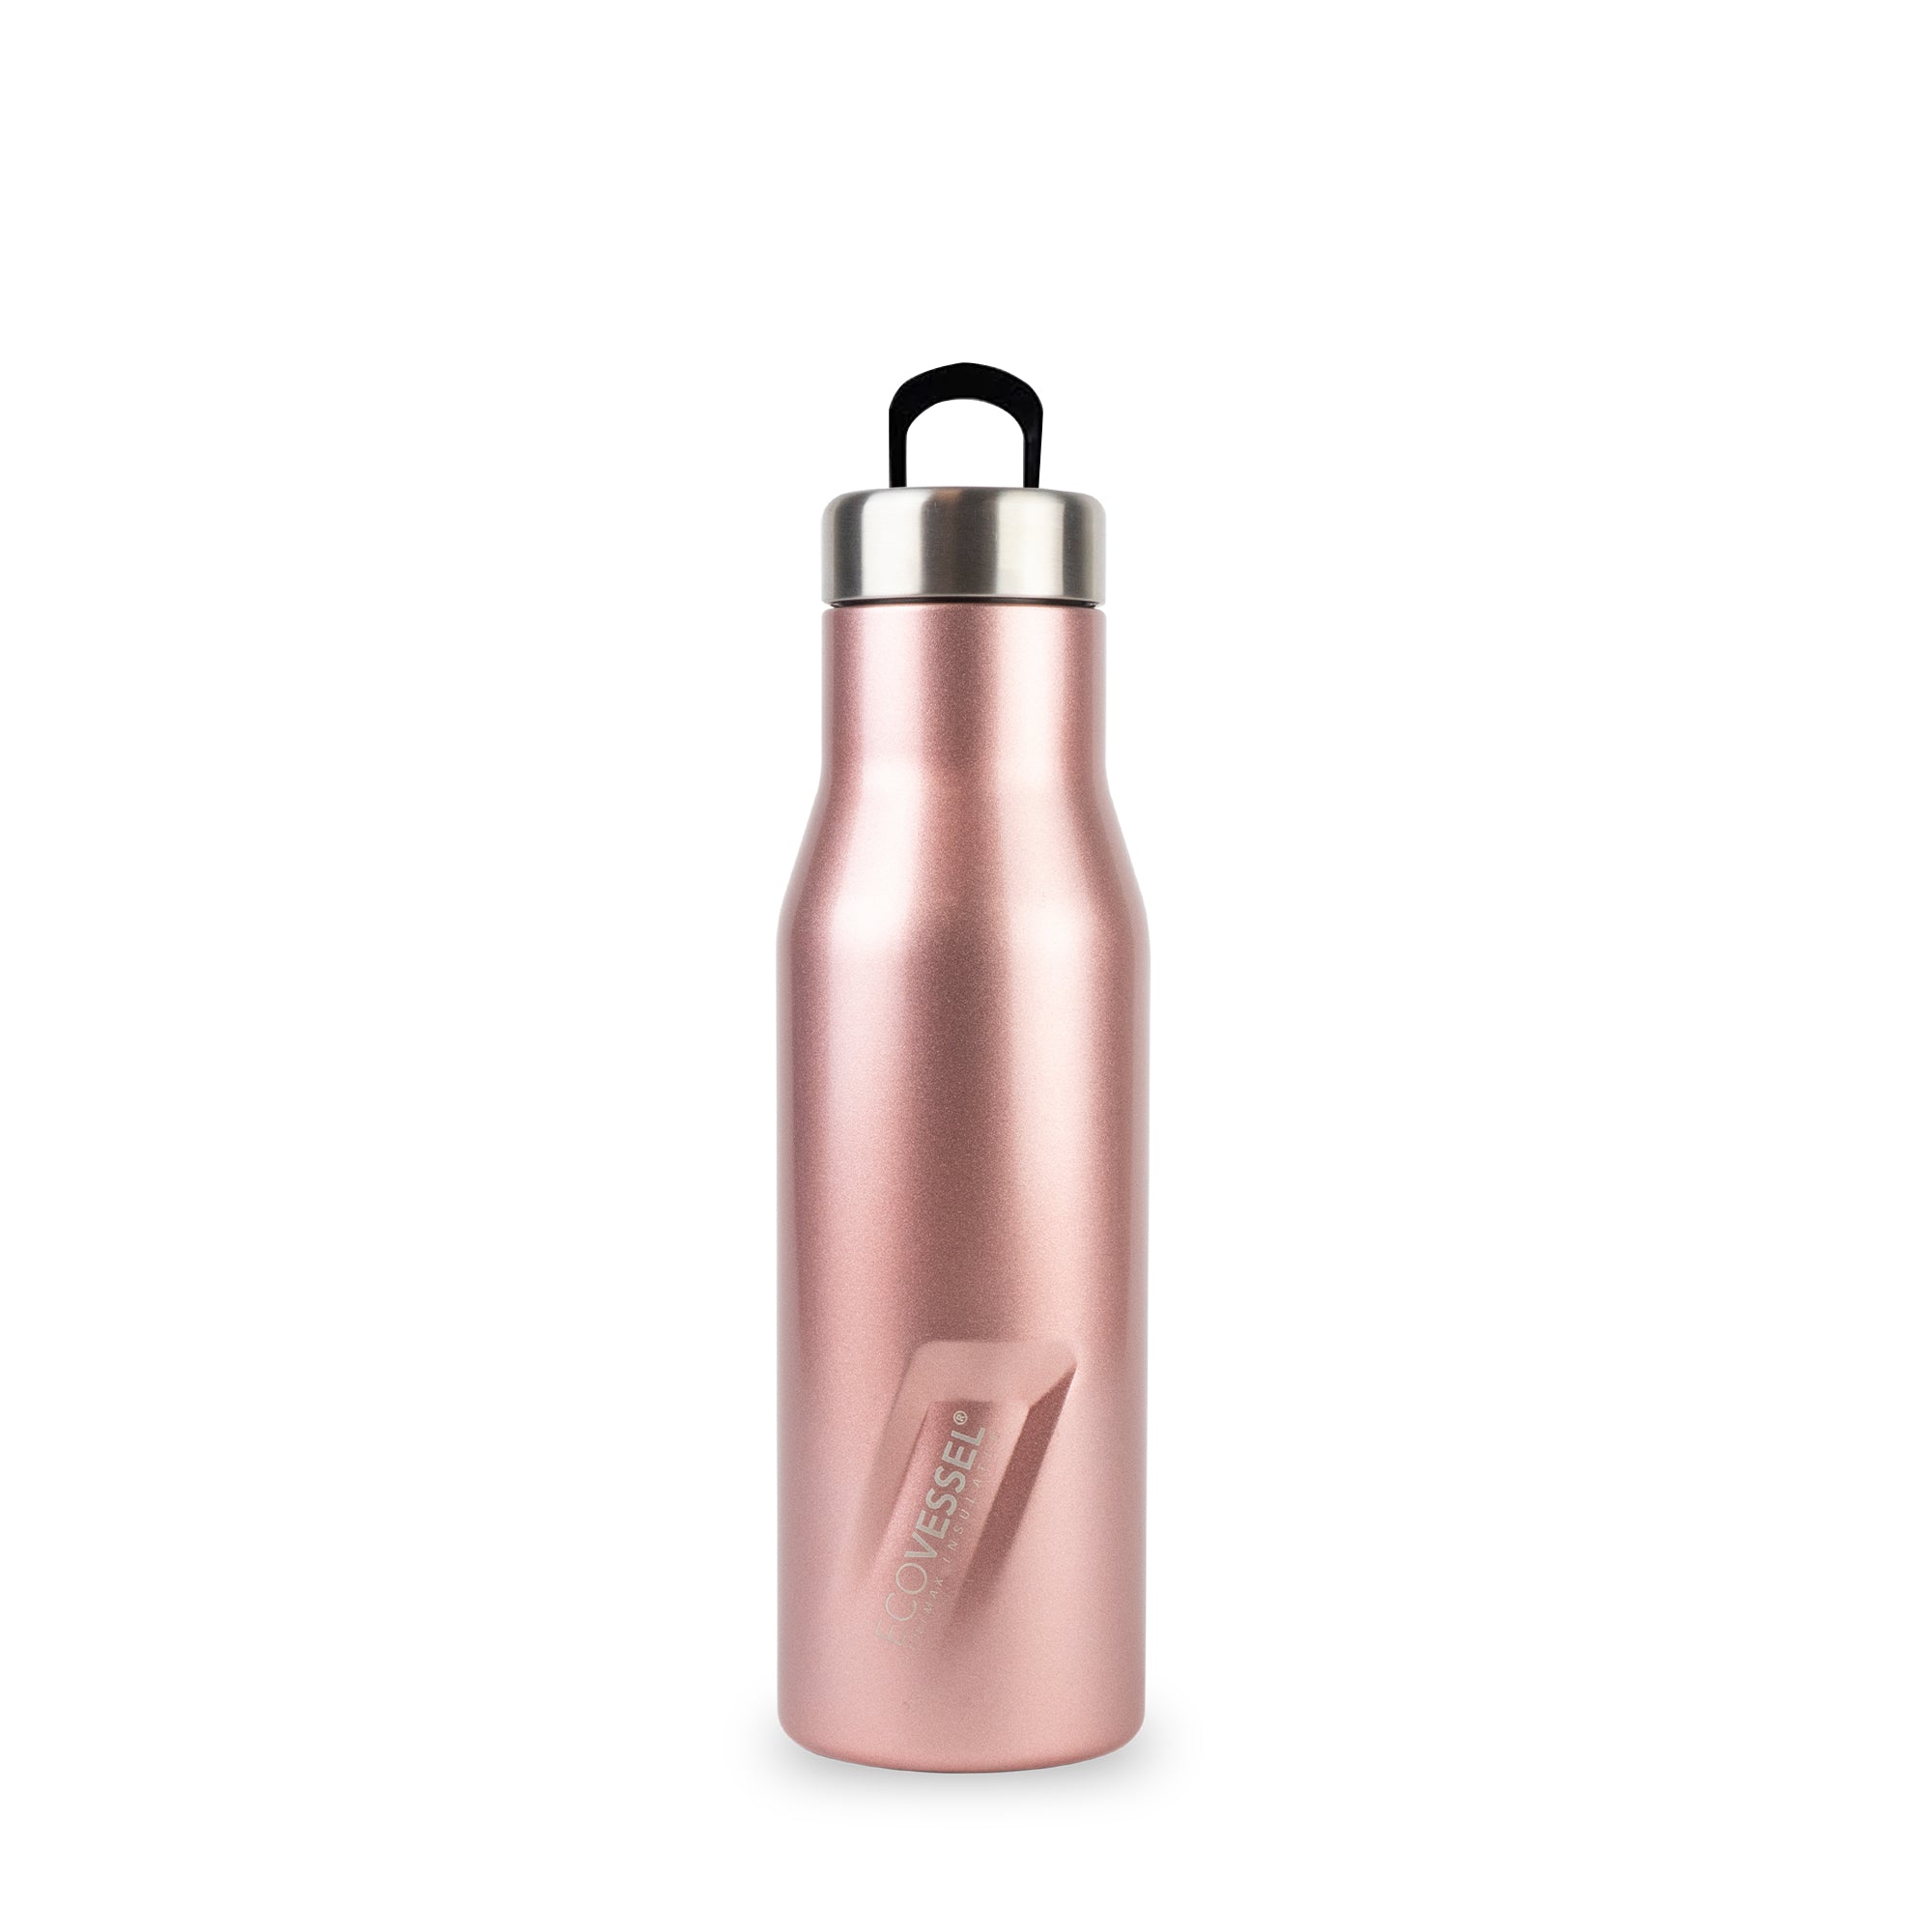 ASPEN - Insulated Stainless Steel Water & Wine Bottle with Hidden Handle - 16oz